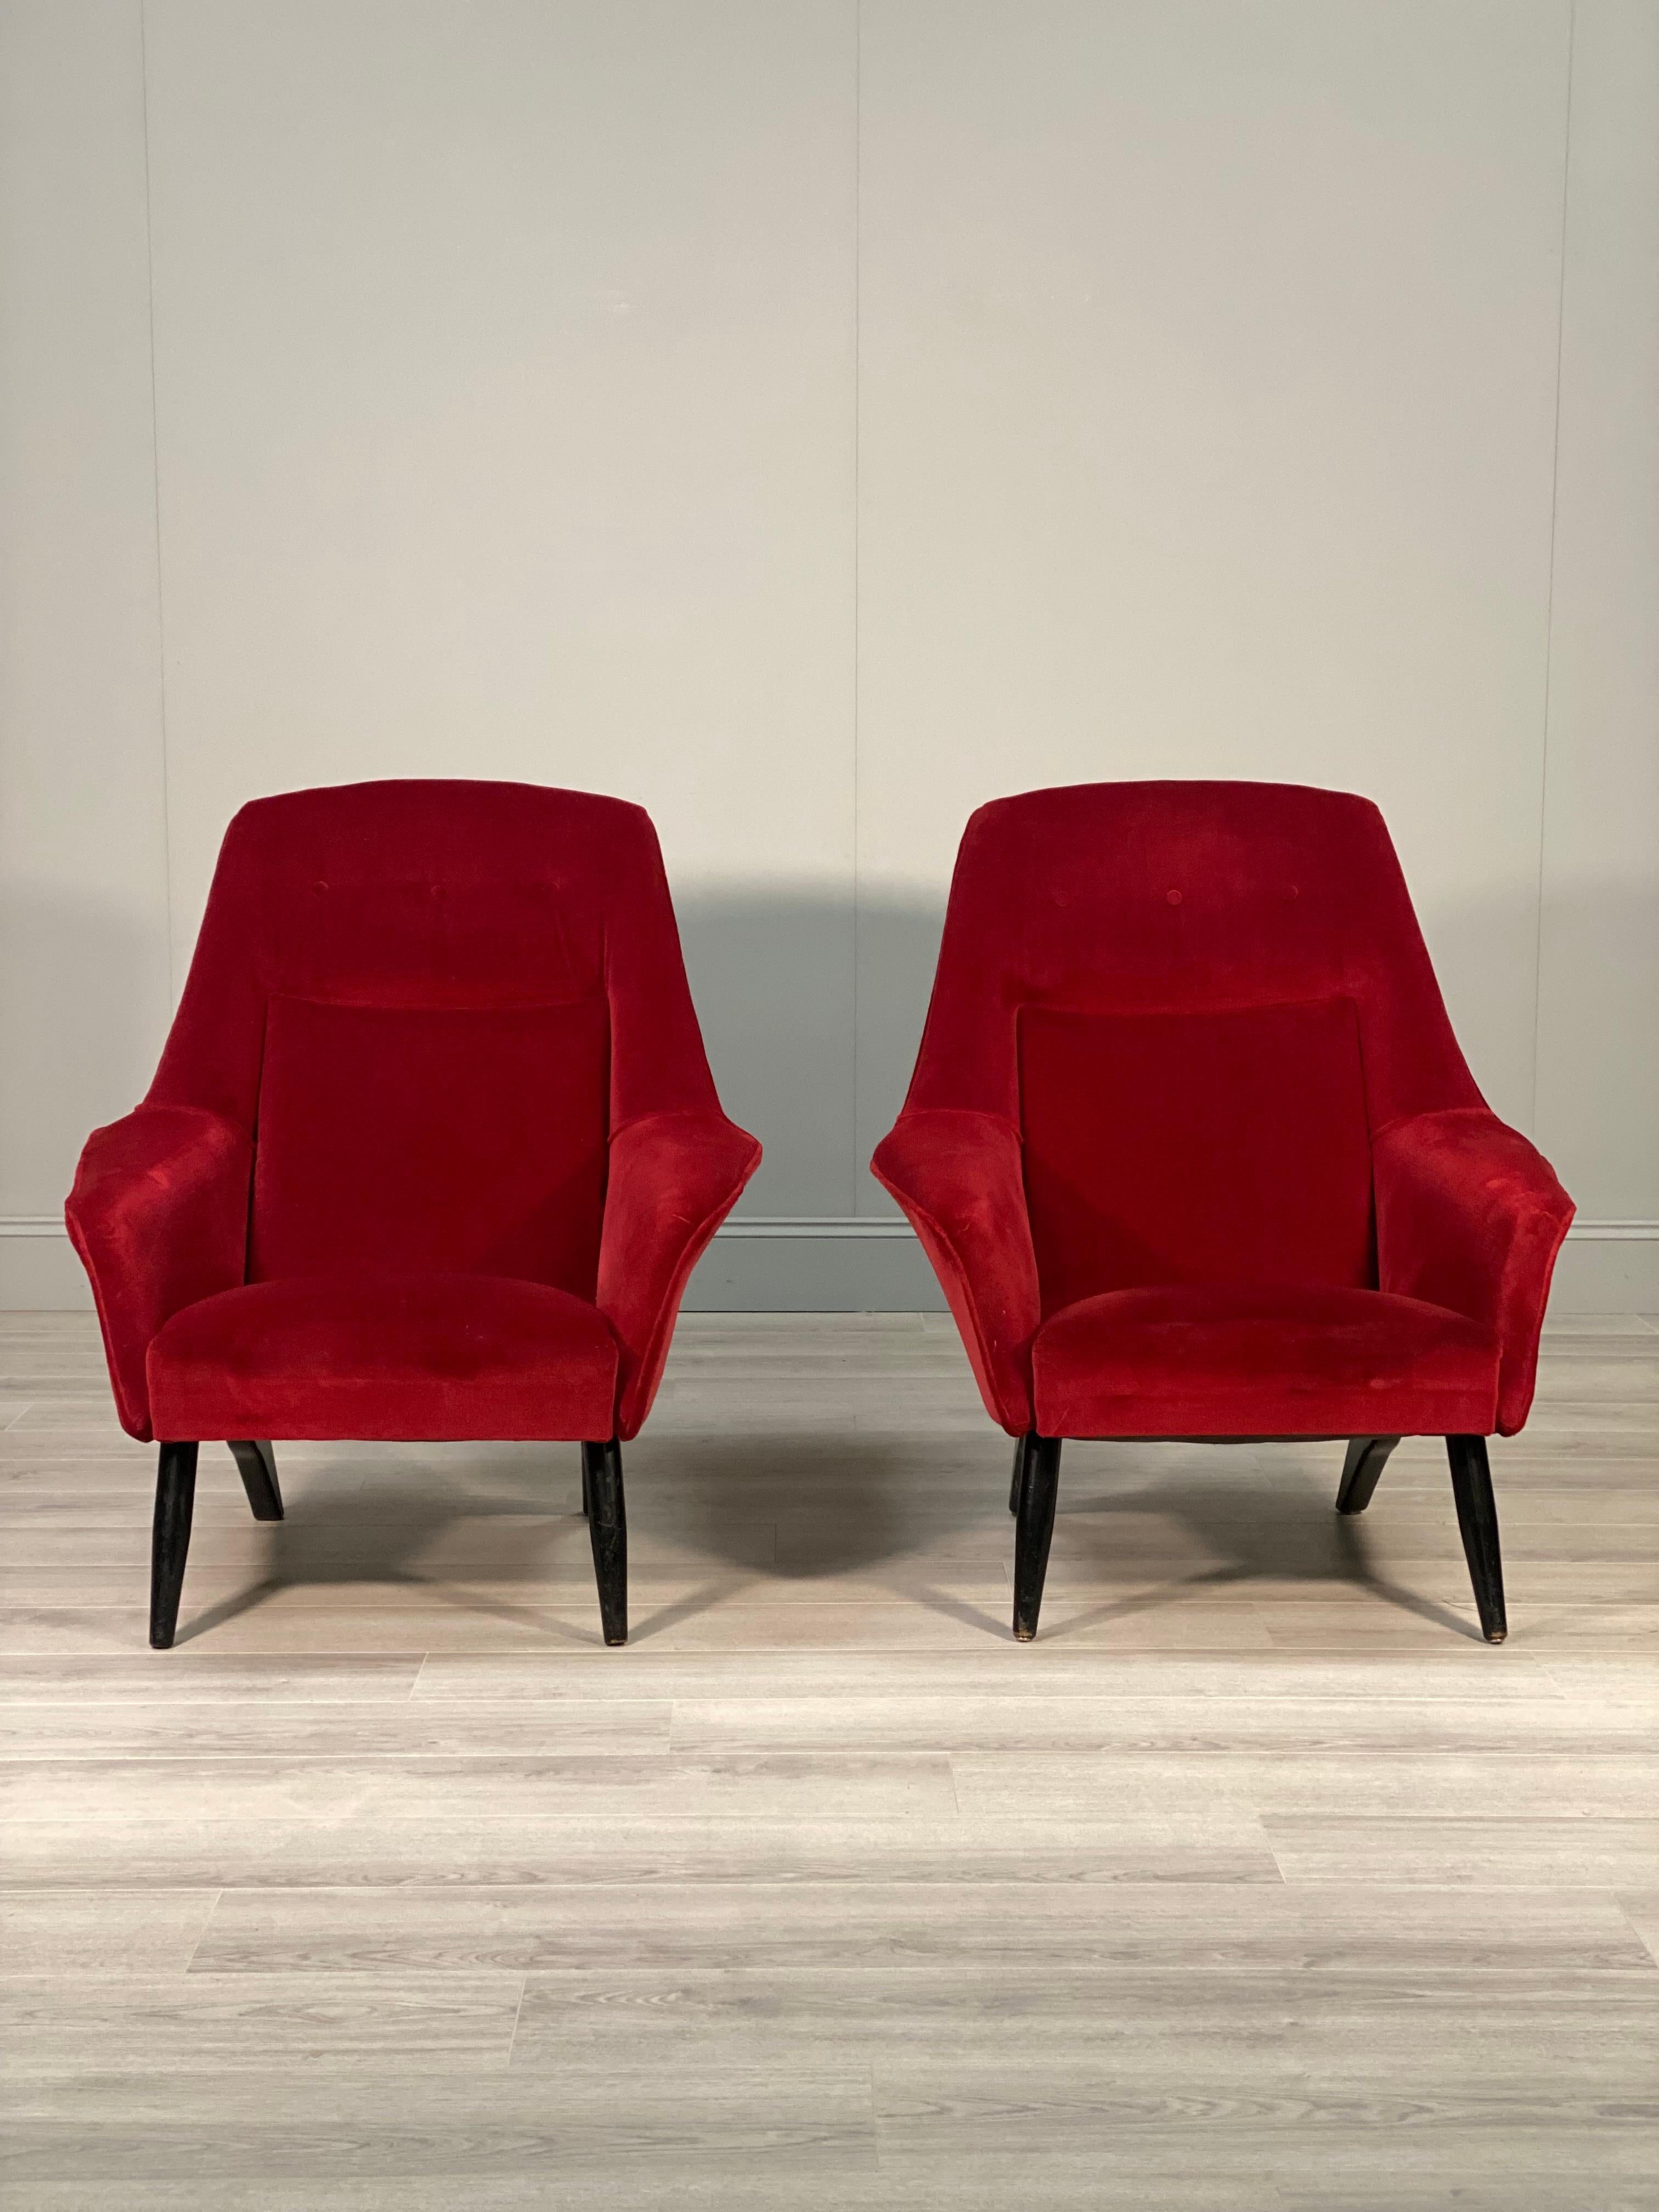 A stylish pair of armchair’s dating to the 1960’s. The armchairs have a stylish mid 20th century shape with a high back and winged armrests sitting on stylish ebonised legs. The chairs are in very good original condition with the original rich red